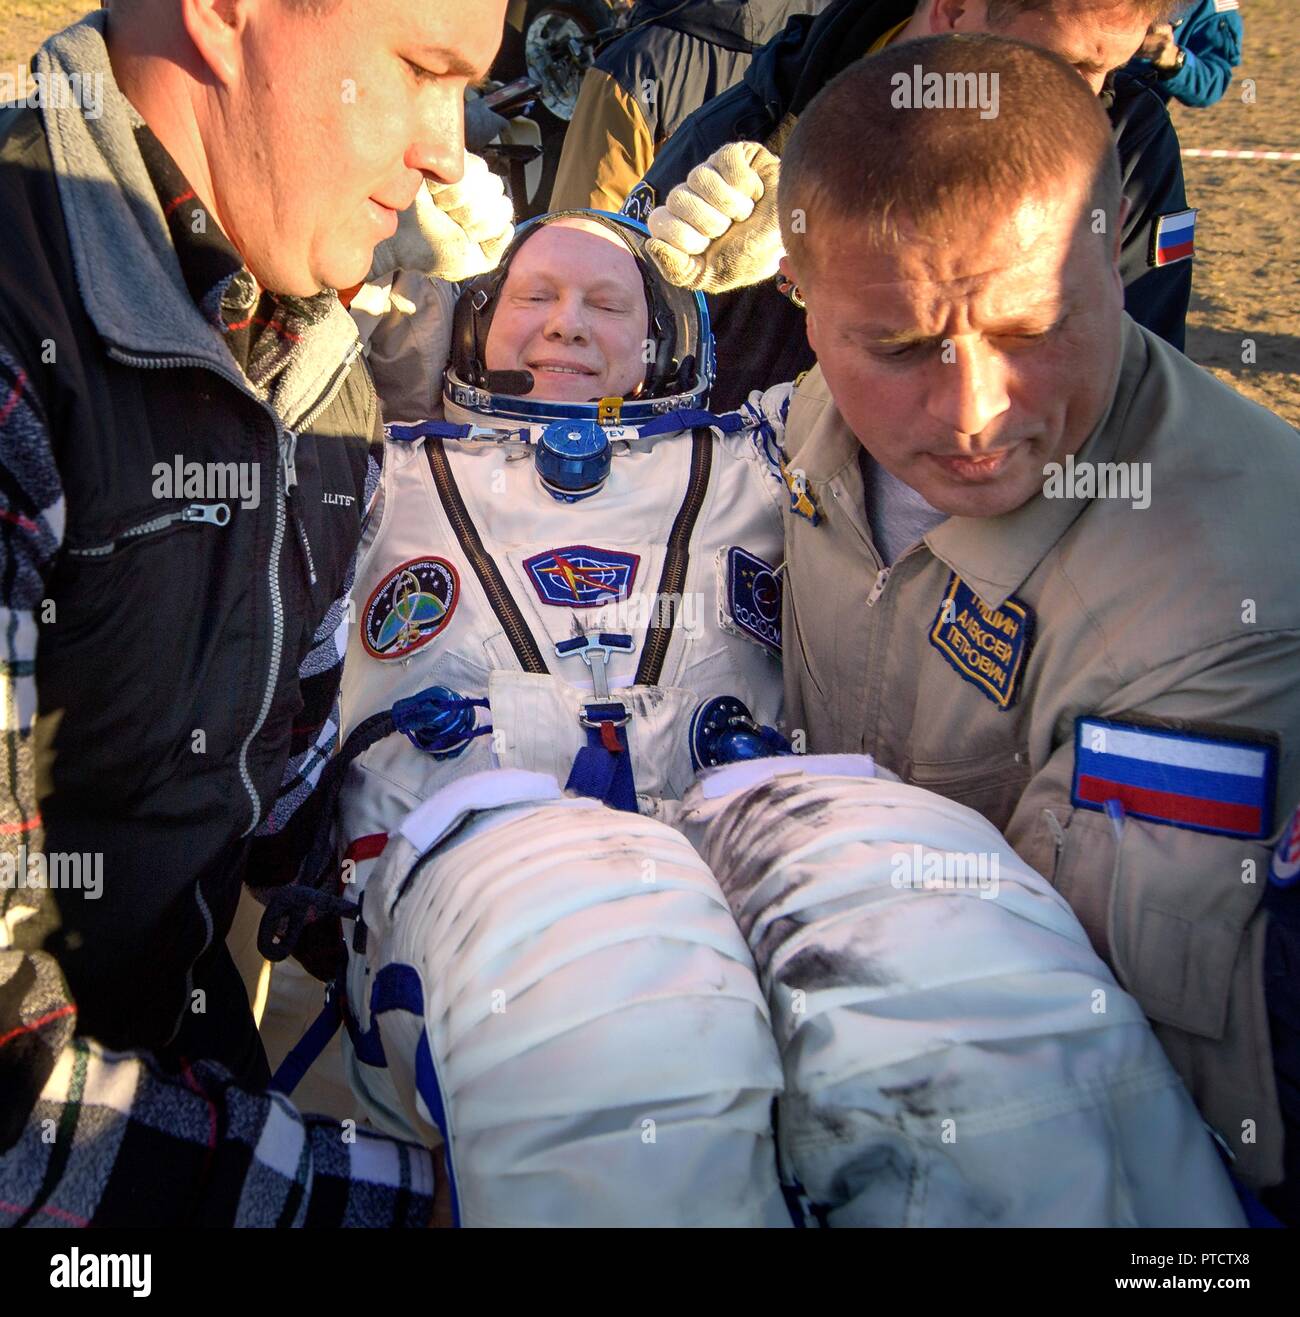 International Space Station Expedition 56 Soyuz Commander Oleg Artemyev is helped out from the Russian Soyuz MS-08 spacecraft shortly after landing October 4, 2018 near Zhezkazgan, Kazakhstan. Oleg Artemyev along with astronauts Drew Feustel and Ricky Arnold of NASA,are returning after 197 days in space. Stock Photo